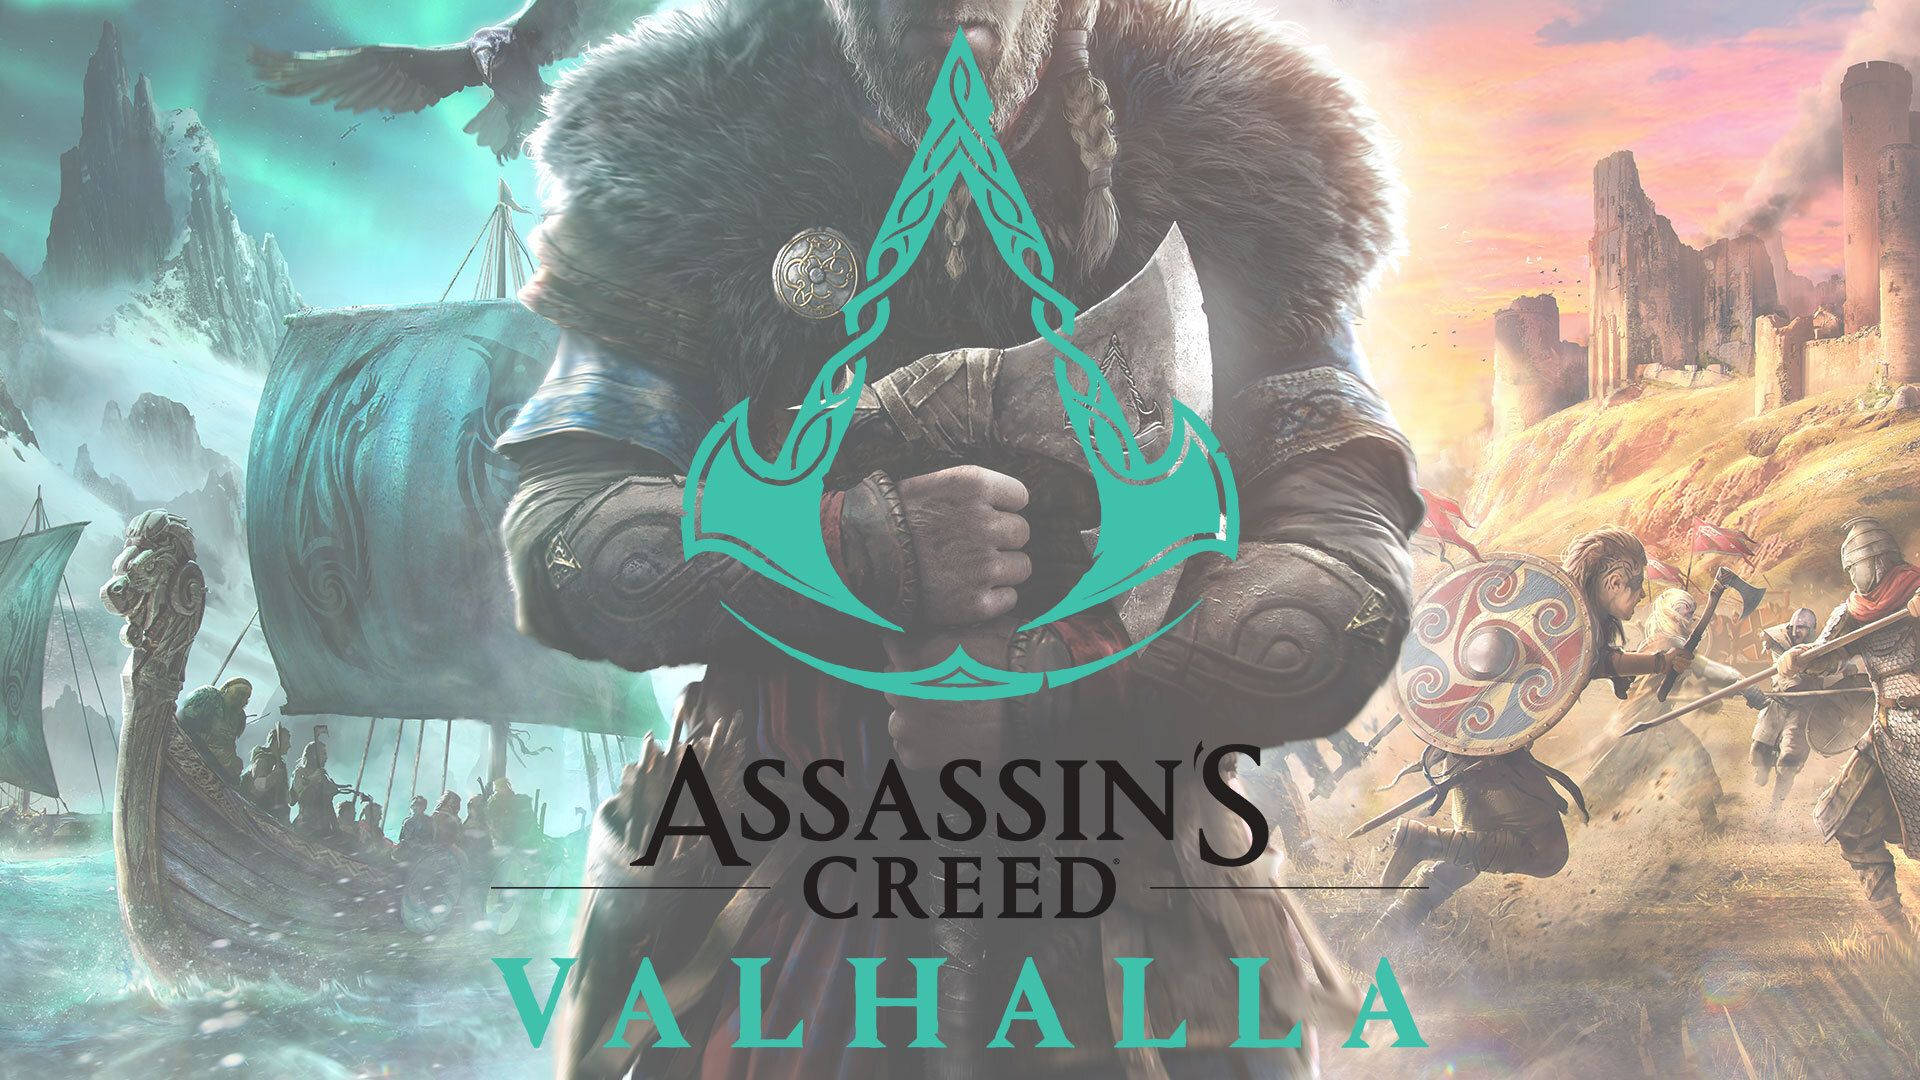 100+] Ac Valhalla Wallpapers 